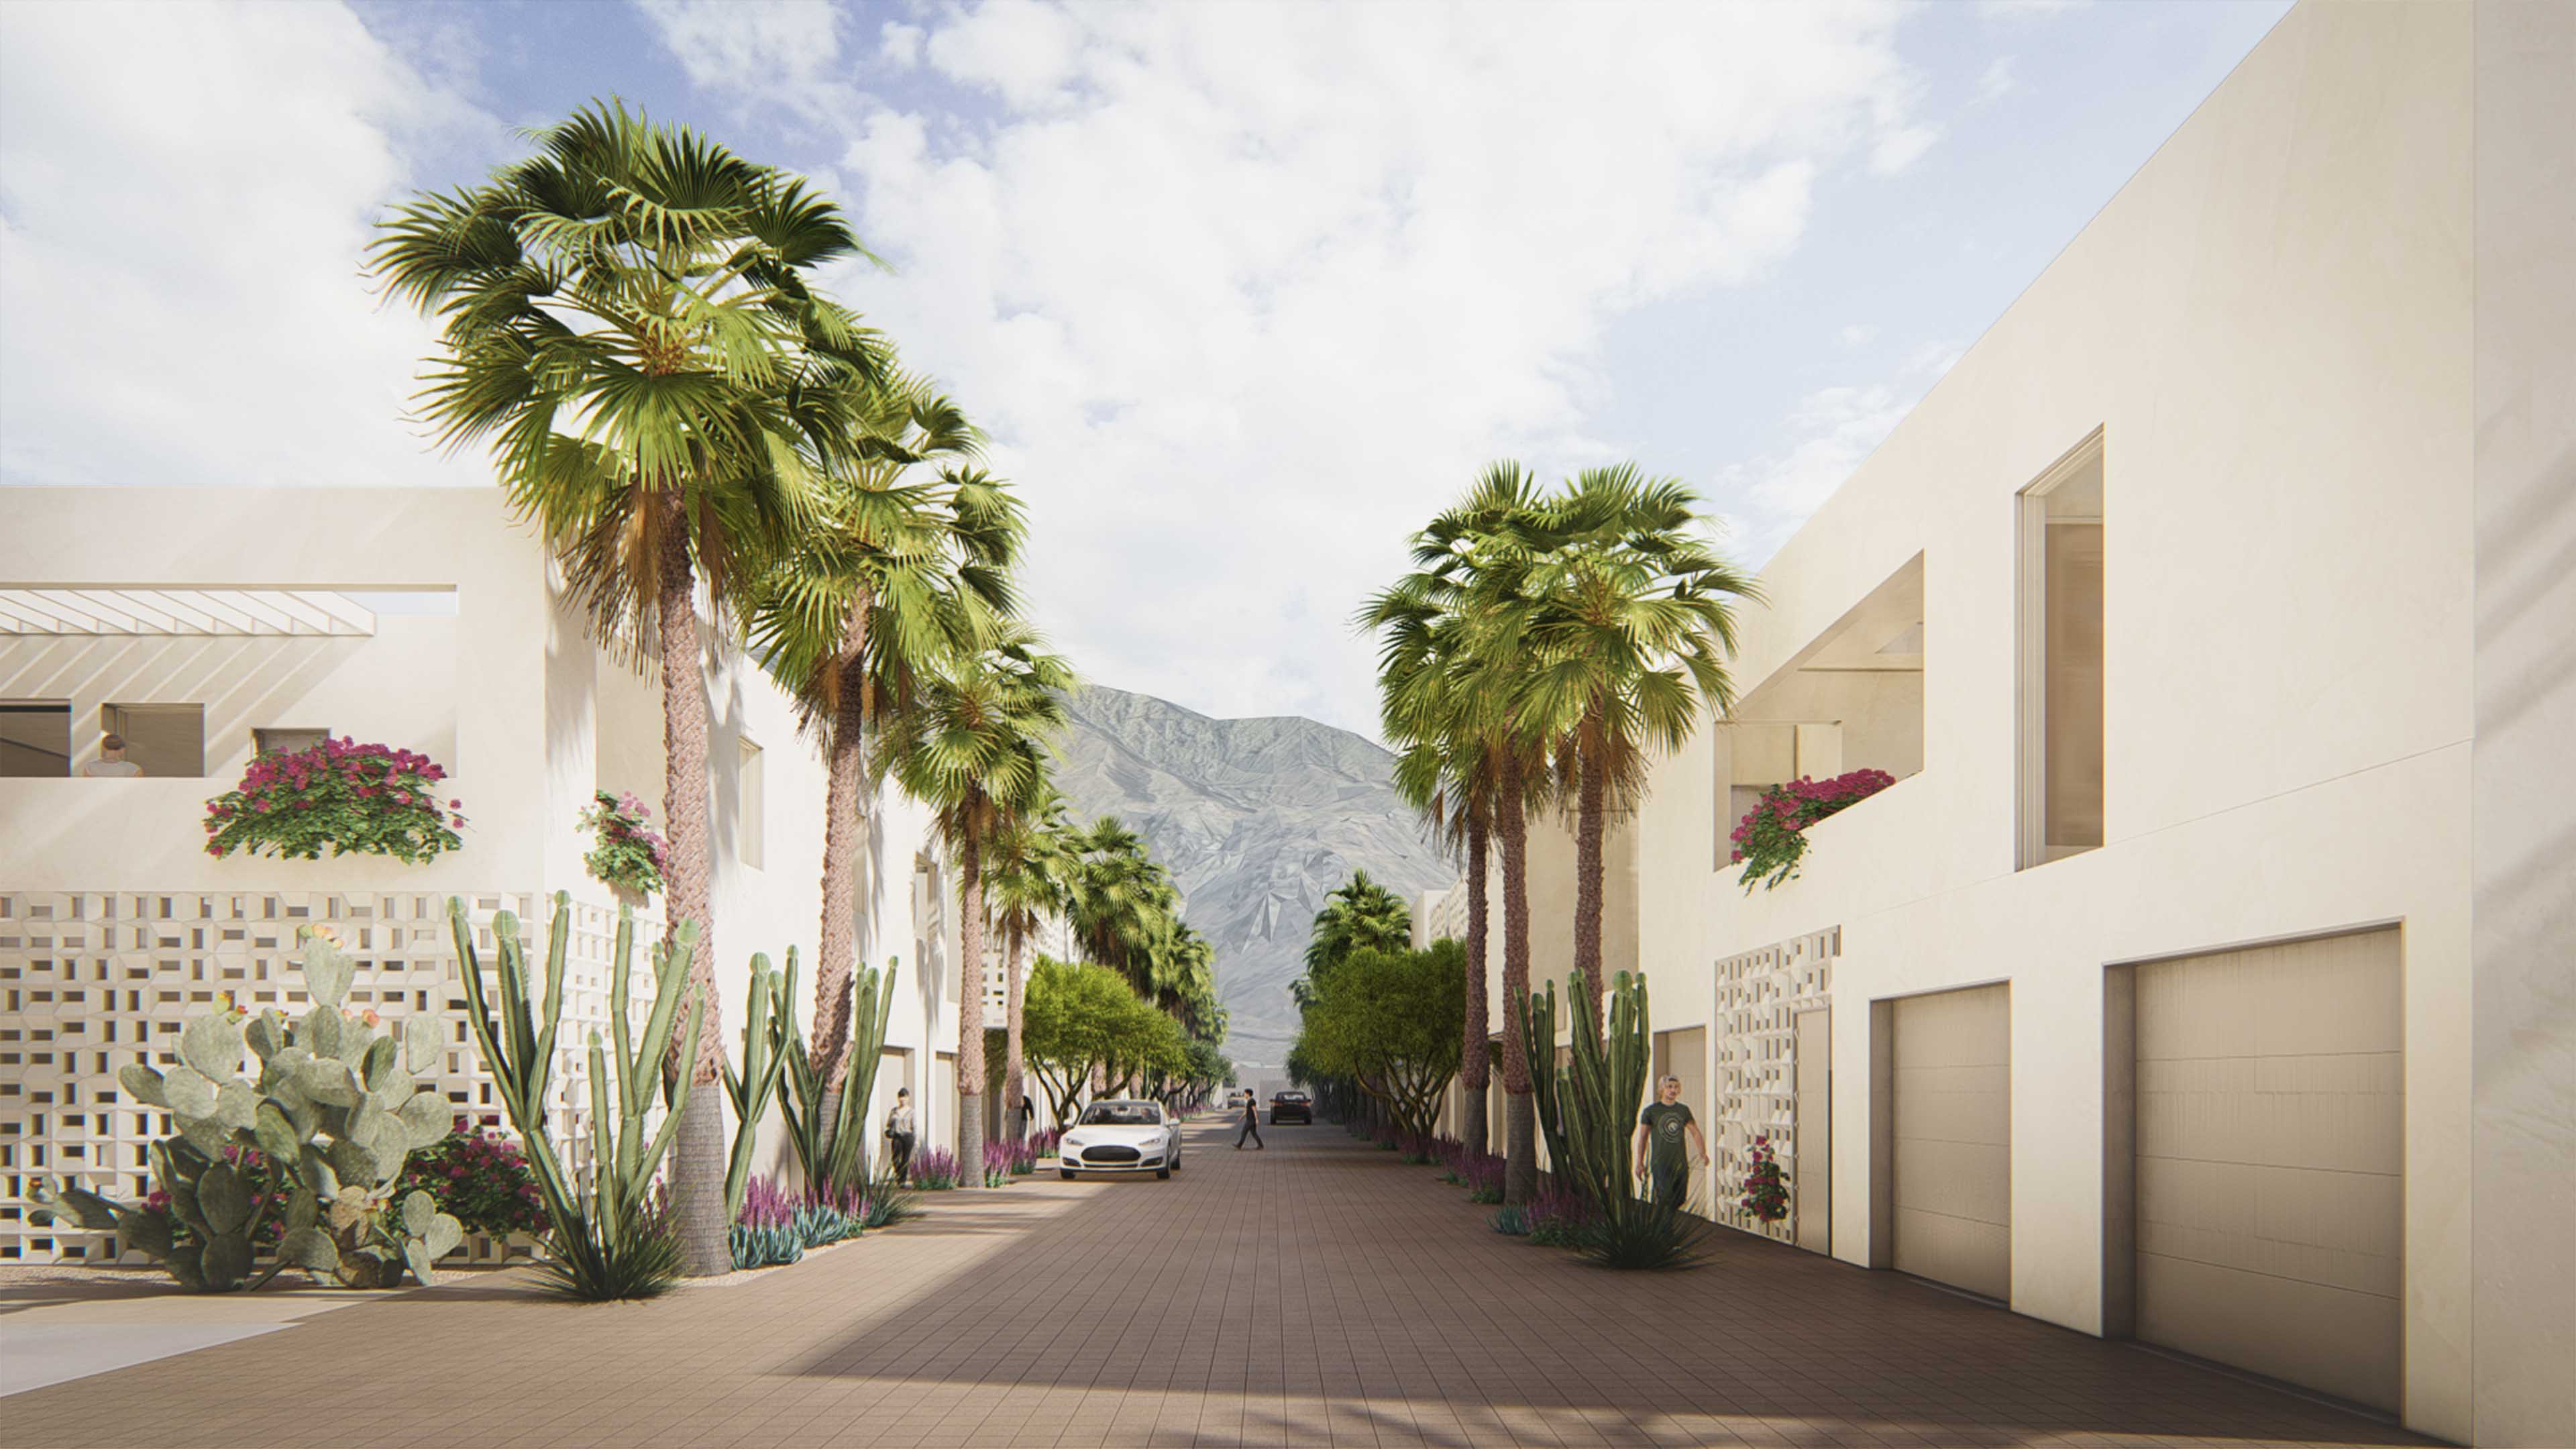 Alleyway lined with palm trees with a view of the mountains peeking in the center